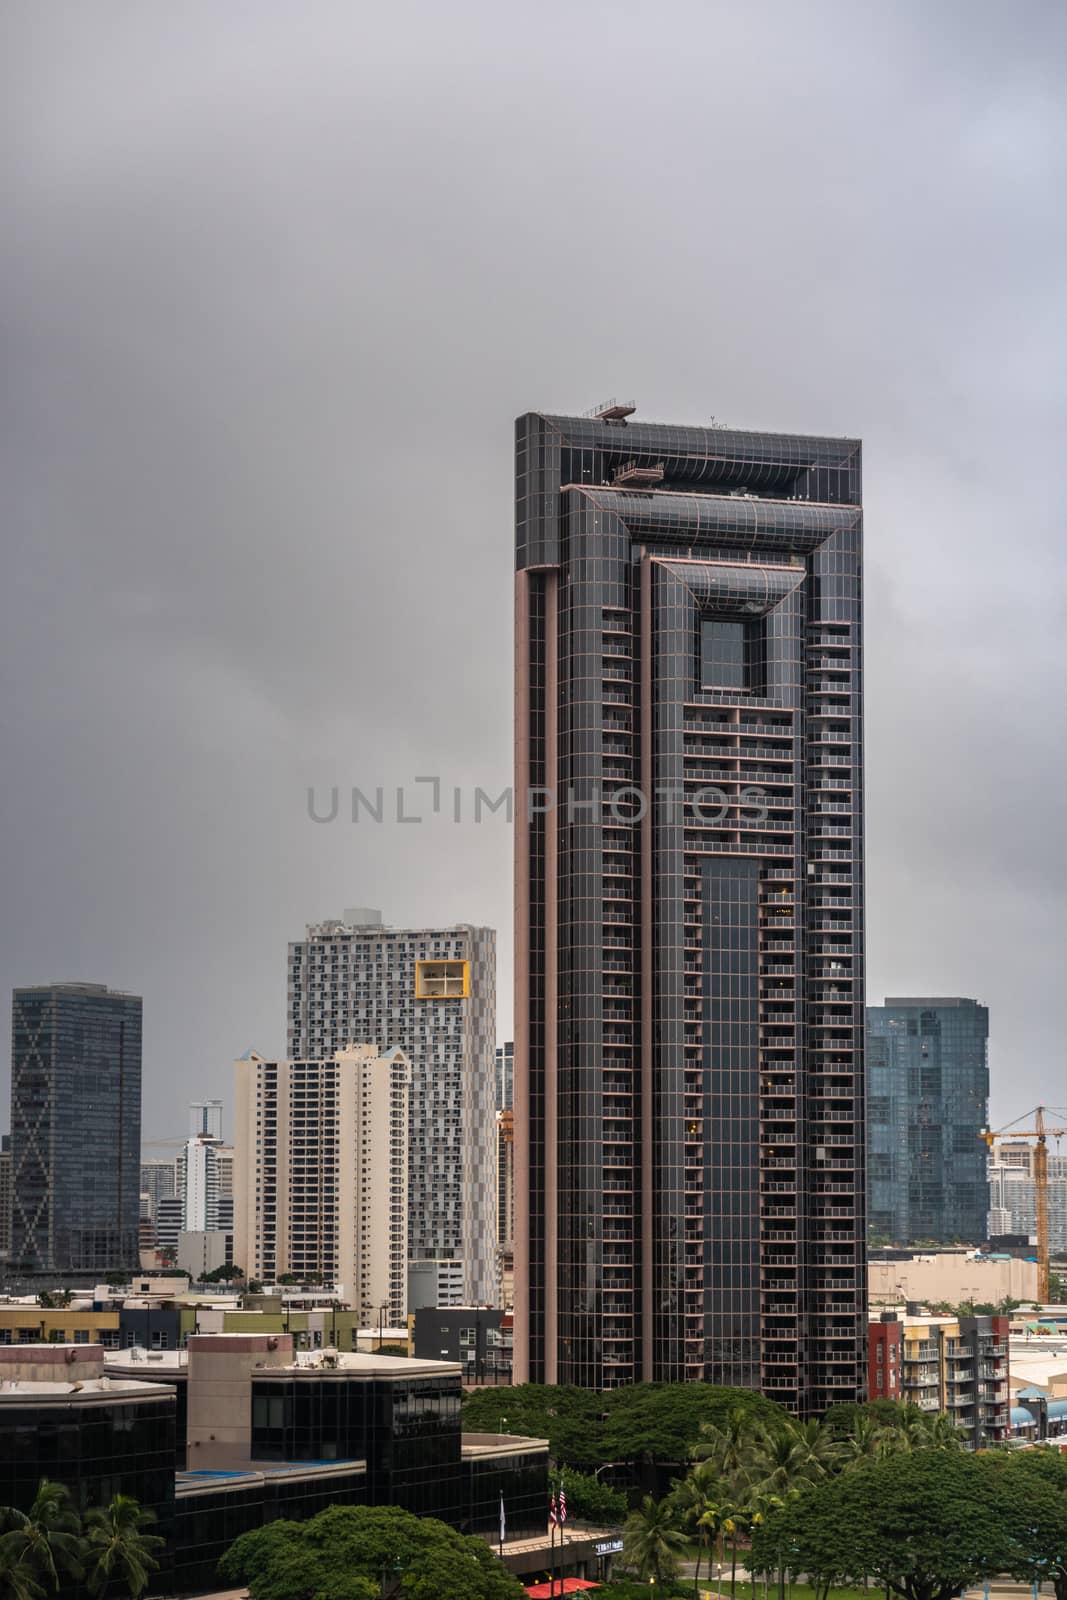 Honolulu  Oahu, Hawaii, USA. - January 11, 2020: One of two identical iconic skyscrapers along South Street near waterfront plaza under dark rainy sky. More buildings in back.